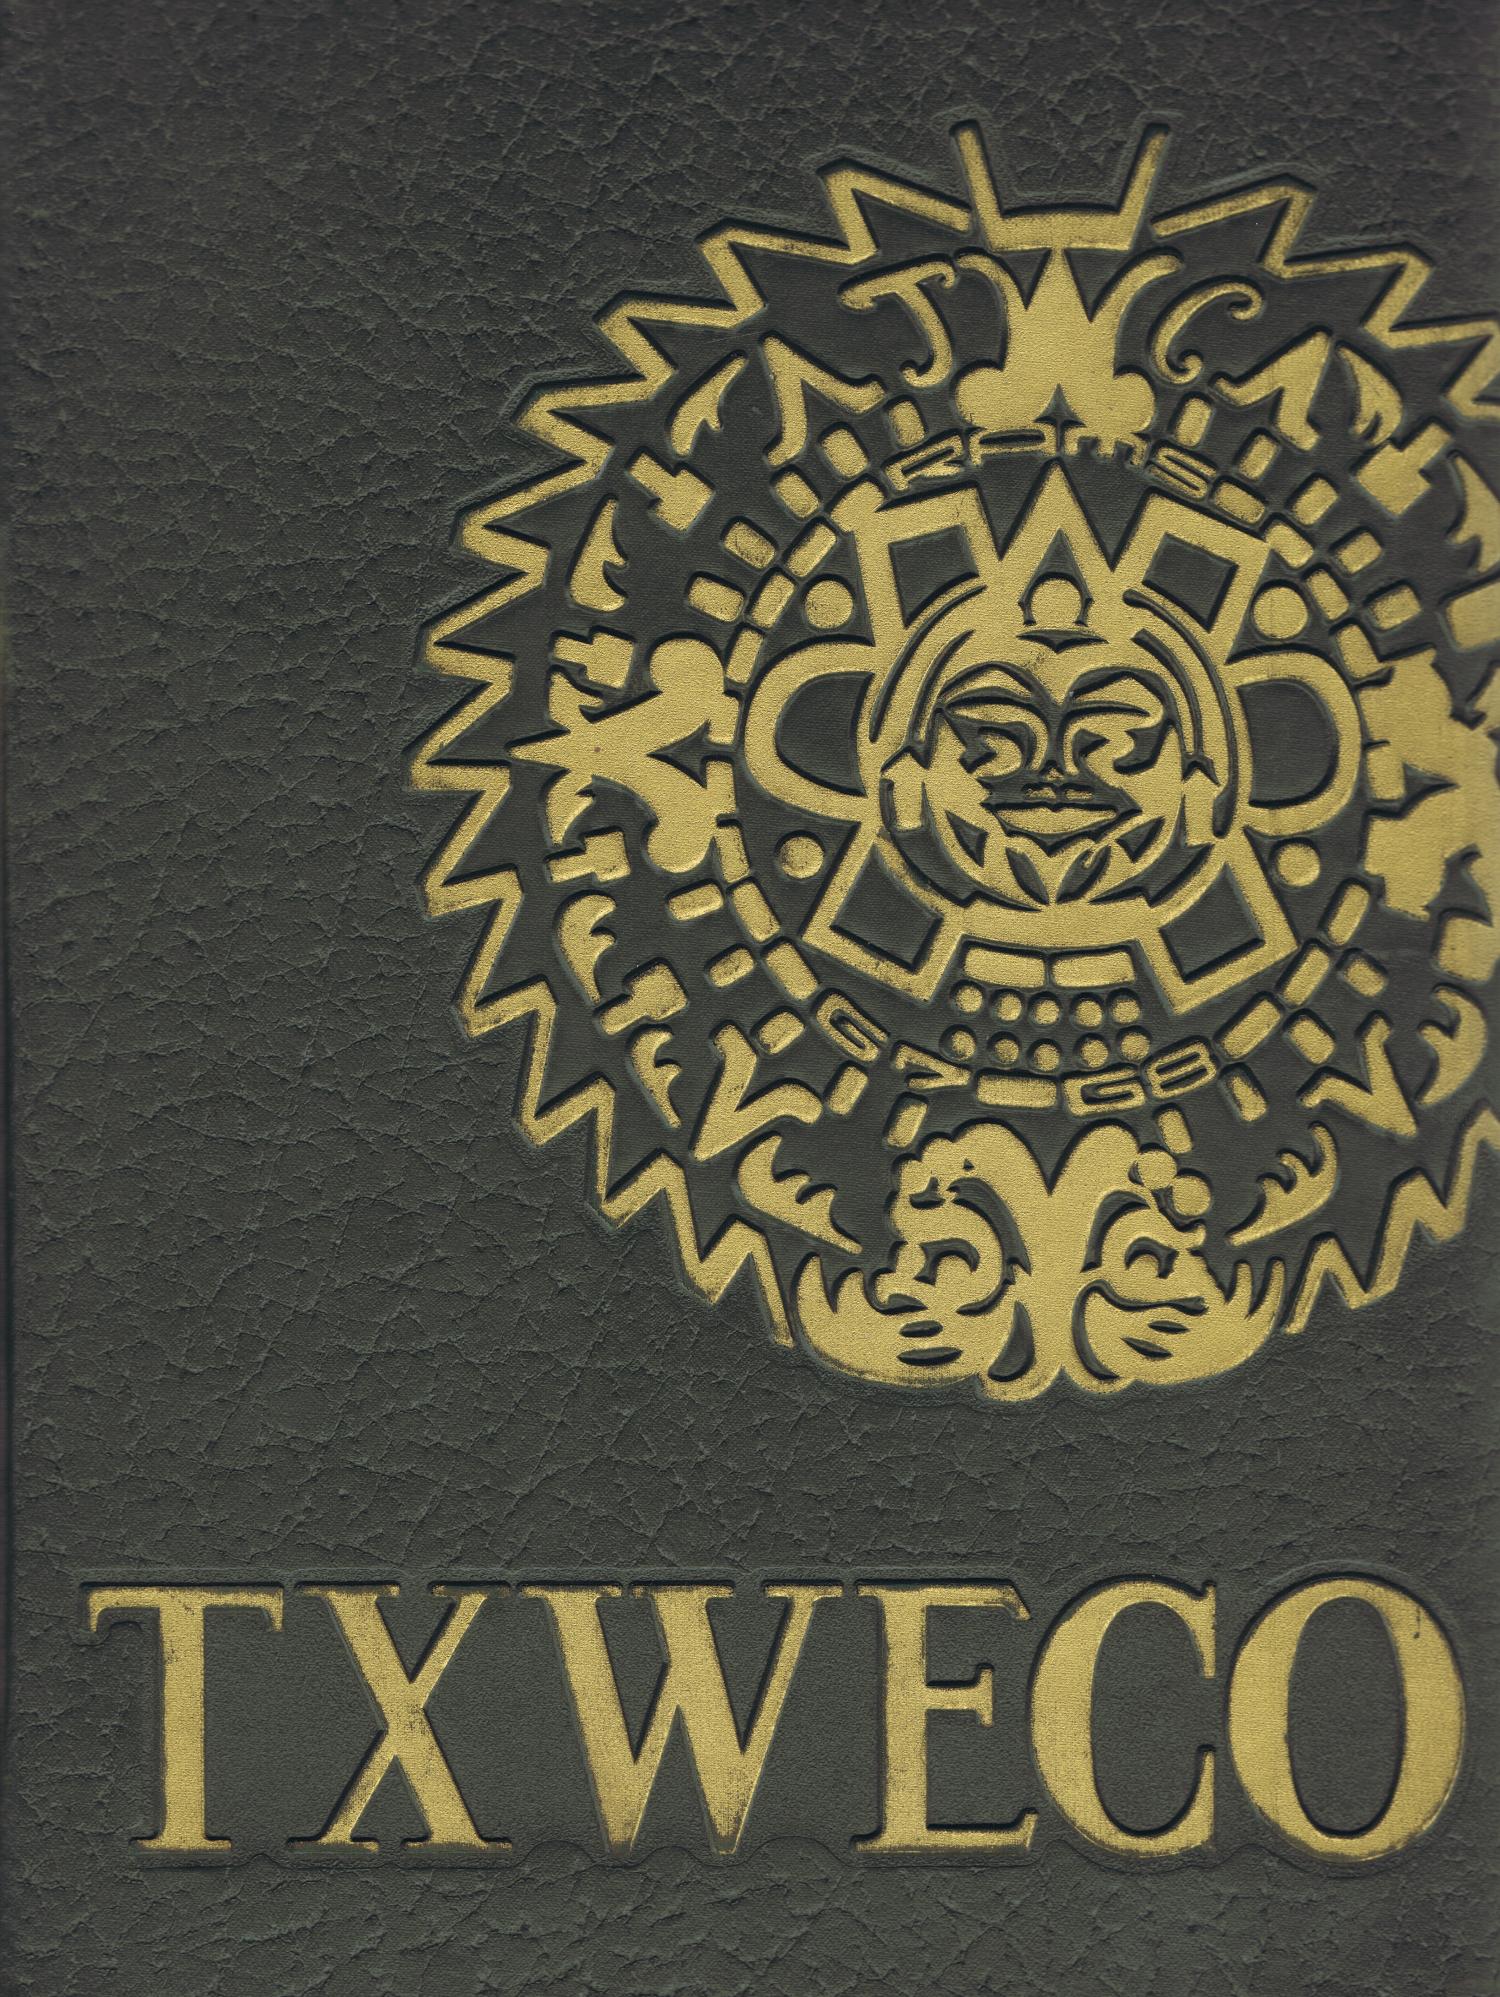 TXWECO, Yearbook of Texas Wesleyan College, 1968
                                                
                                                    Front Cover
                                                